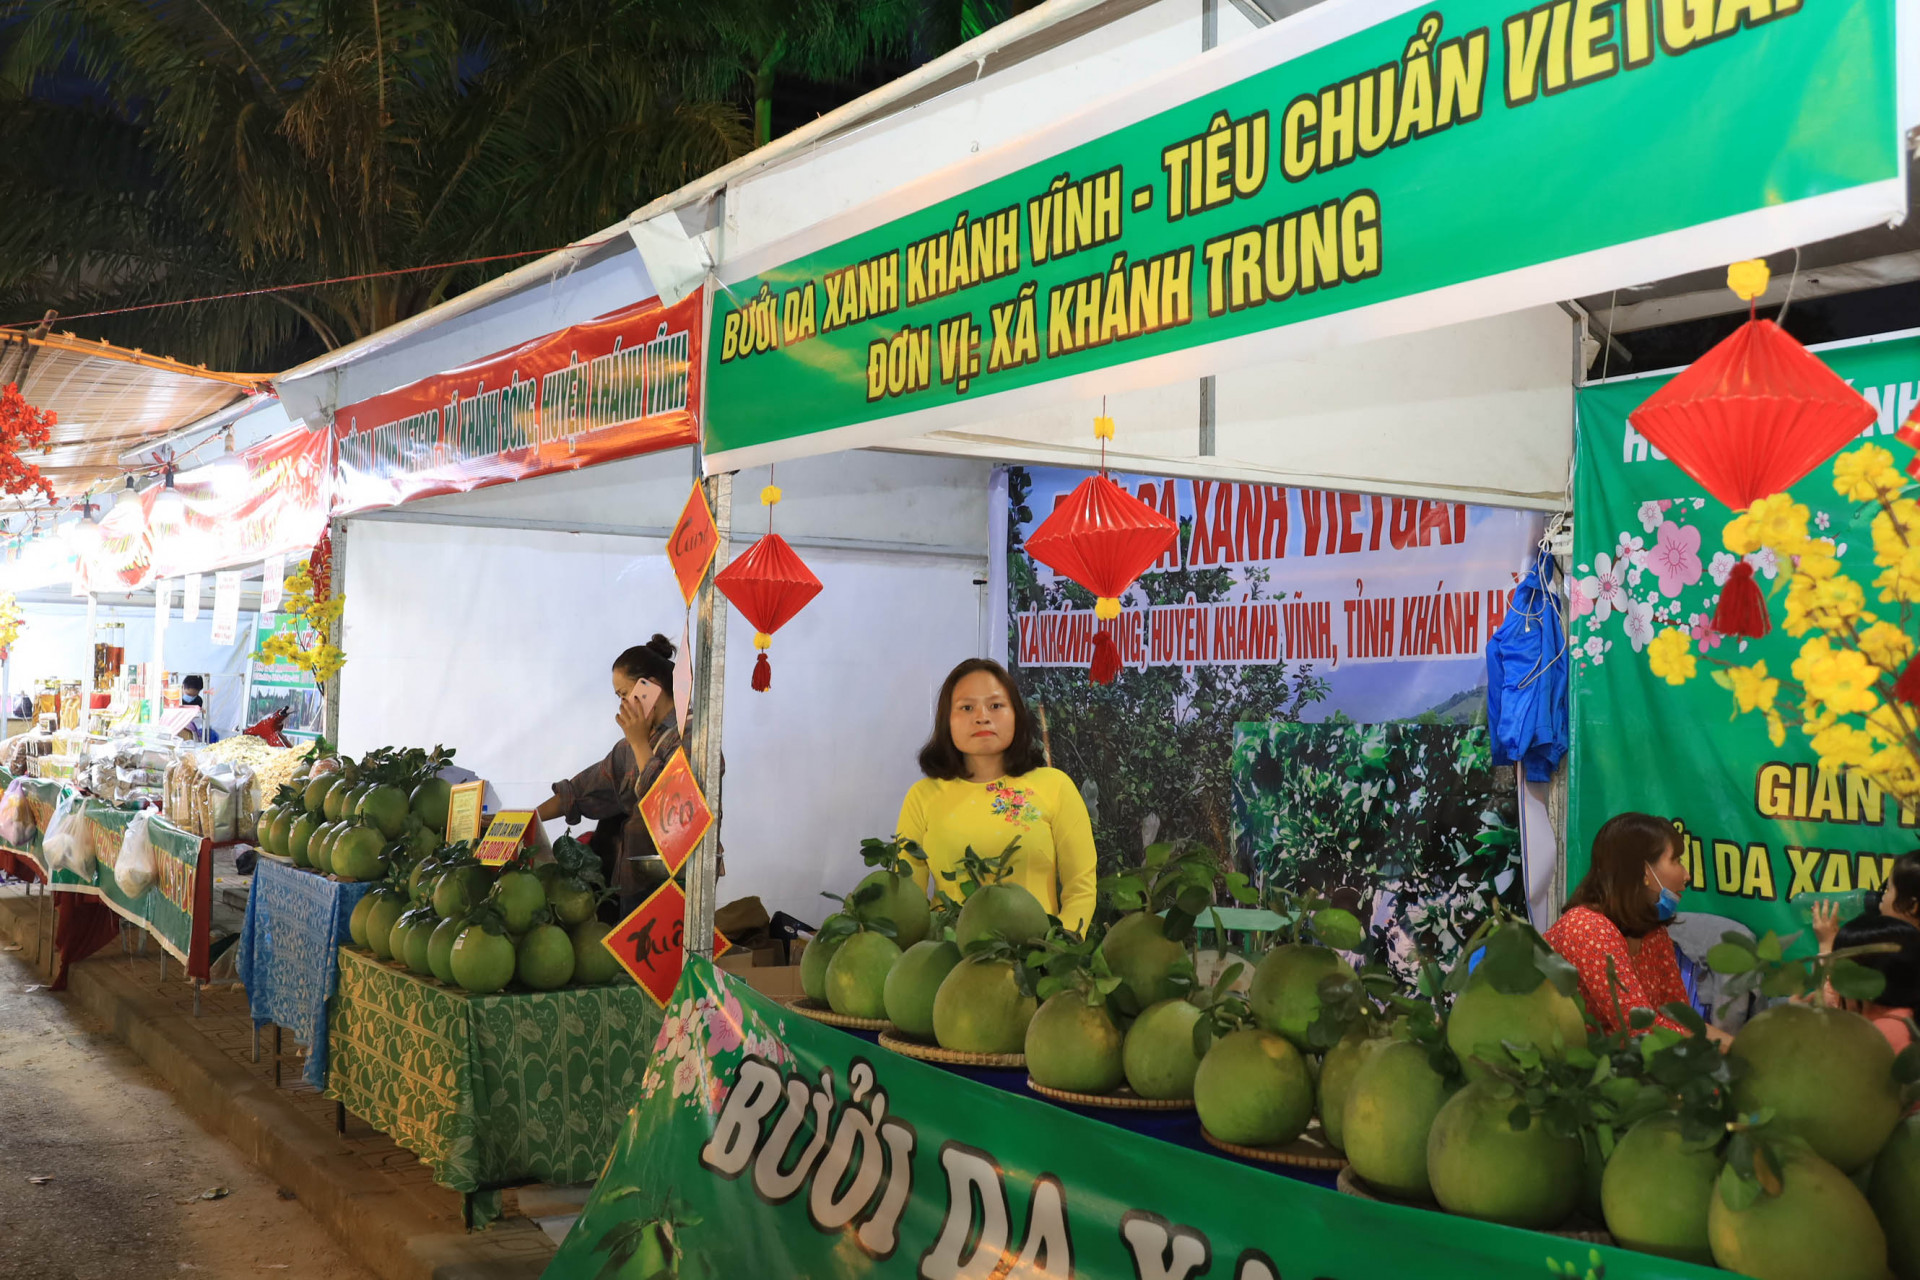 Stalls selling agricultural products and handicrafts